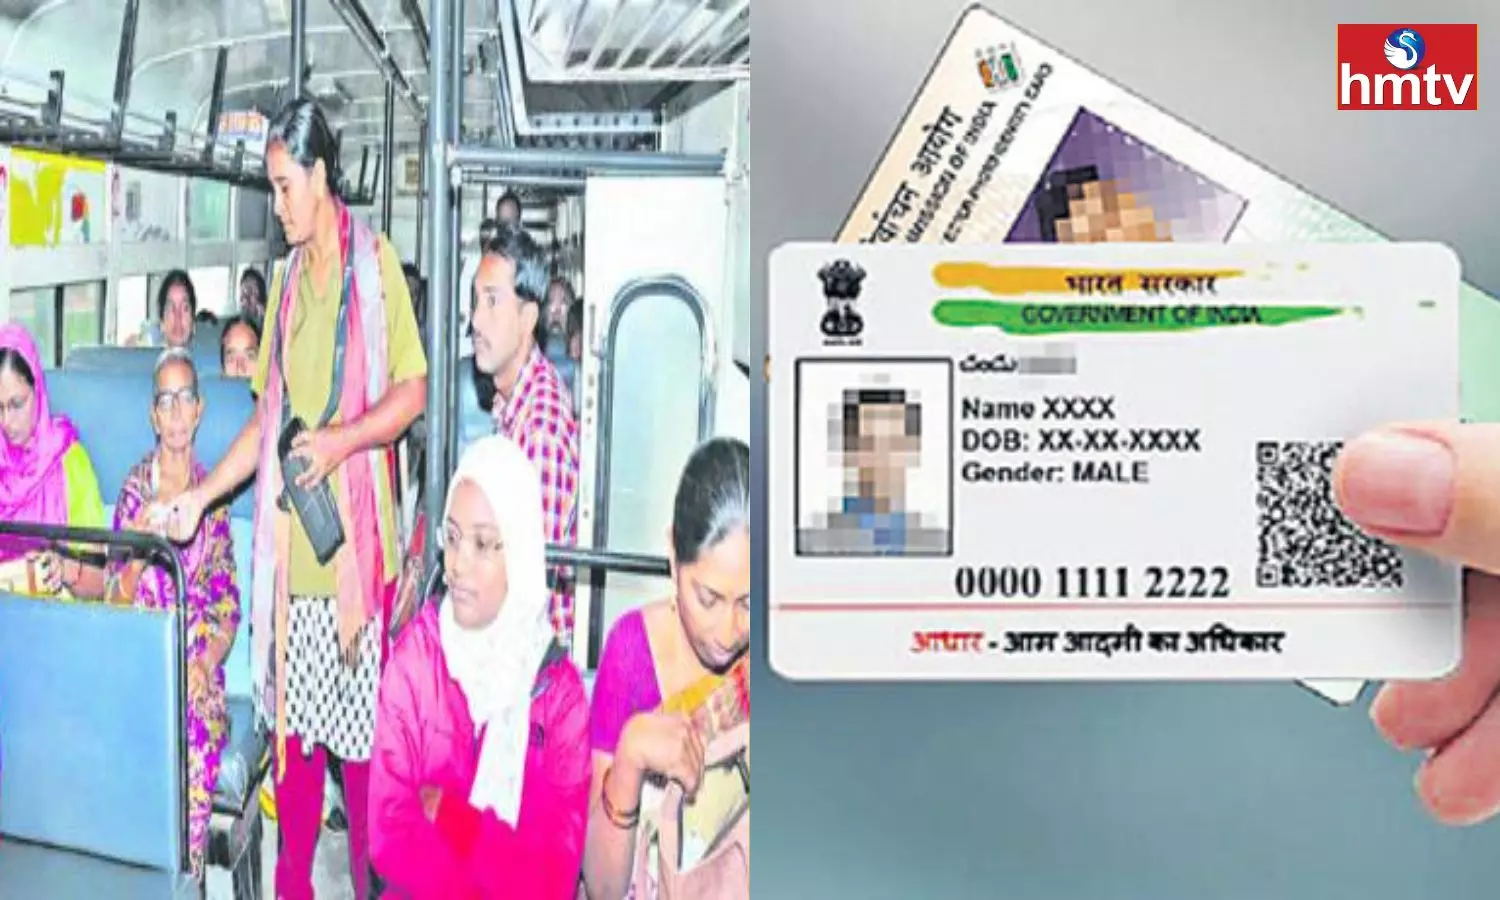 Telangana zero tickets will be issued to women with carry of valid documents like Aadhar voter says TSRTC MD VC Sajjanar